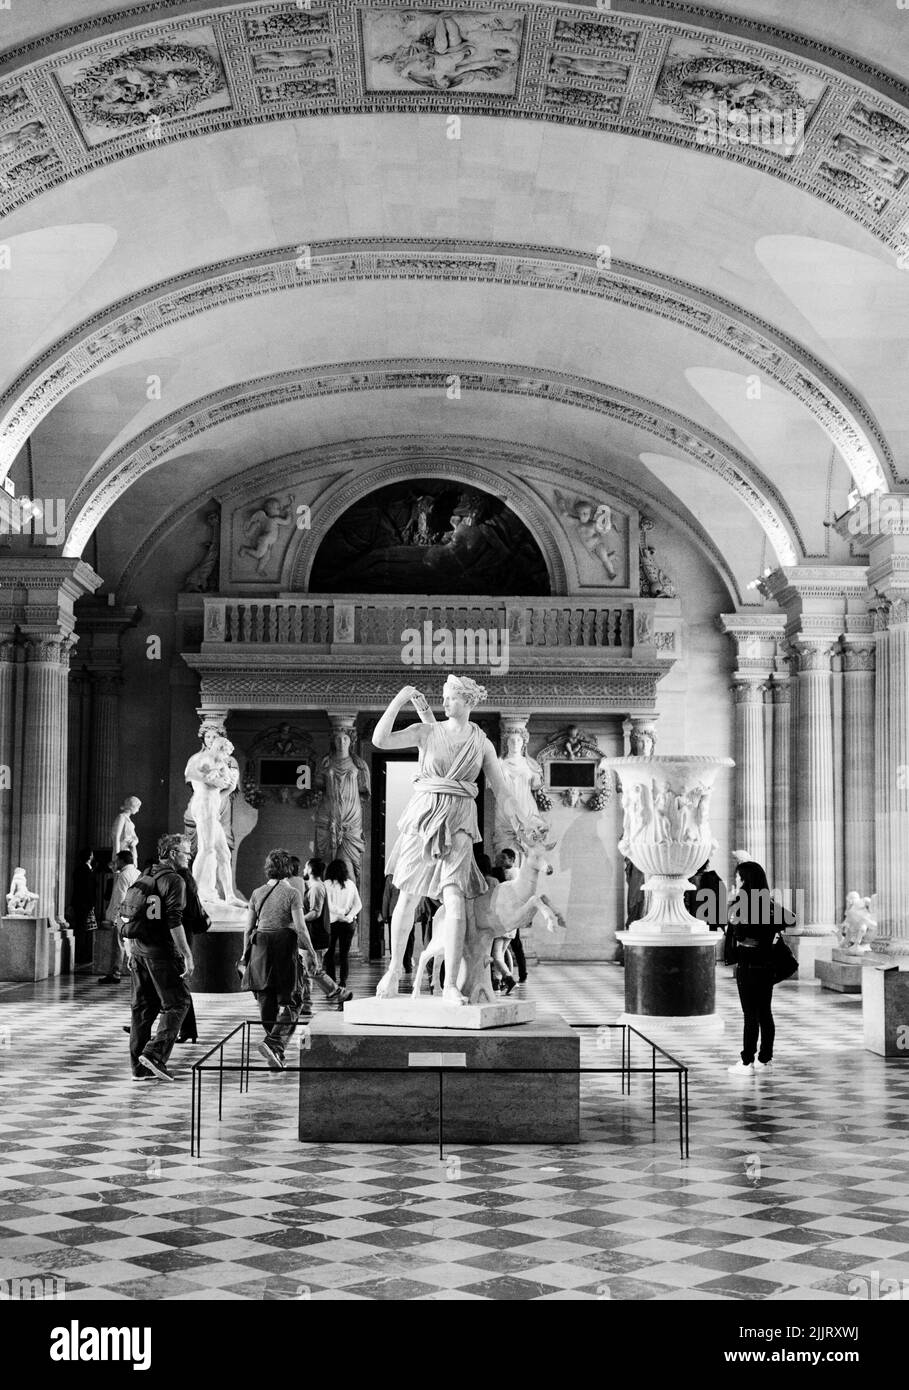 A vertical of sculptures in the Louvre museum in Paris, France shot in grayscale Stock Photo